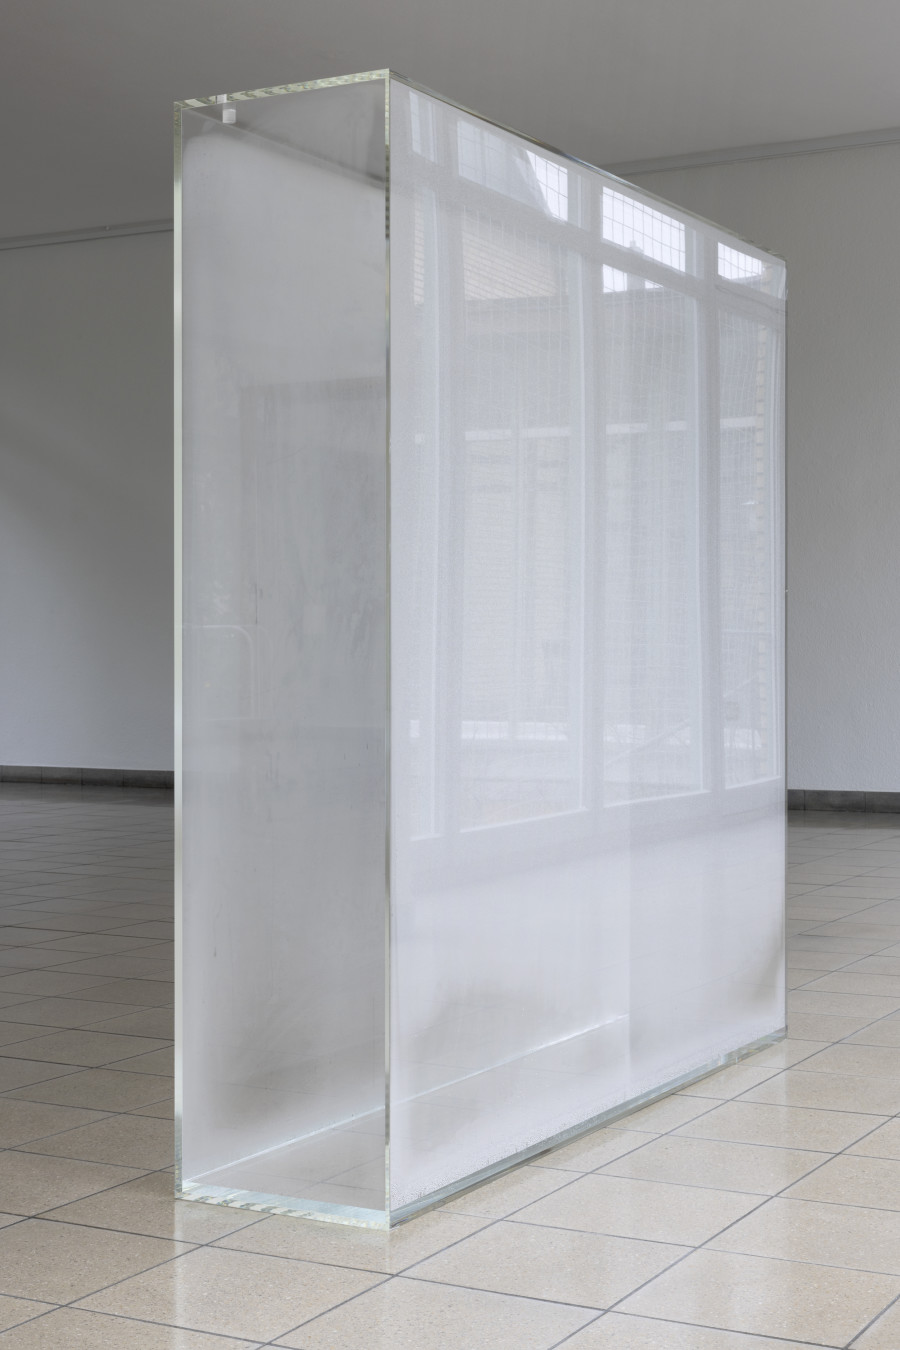 Megan Francis Sullivan, Study of Condensation Wall, Hans Haacke, 1963–66 and 2013, Collection Museum Ludwig, Cologne, 2024. Plexiglass, distilled water, 165 x 38 x 165 cm. Megan Francis Sullivan, Wolkenstudie, installation view, Kunsthaus Glarus, 2024. Photo: Gina Folly. Courtesy of the artist.